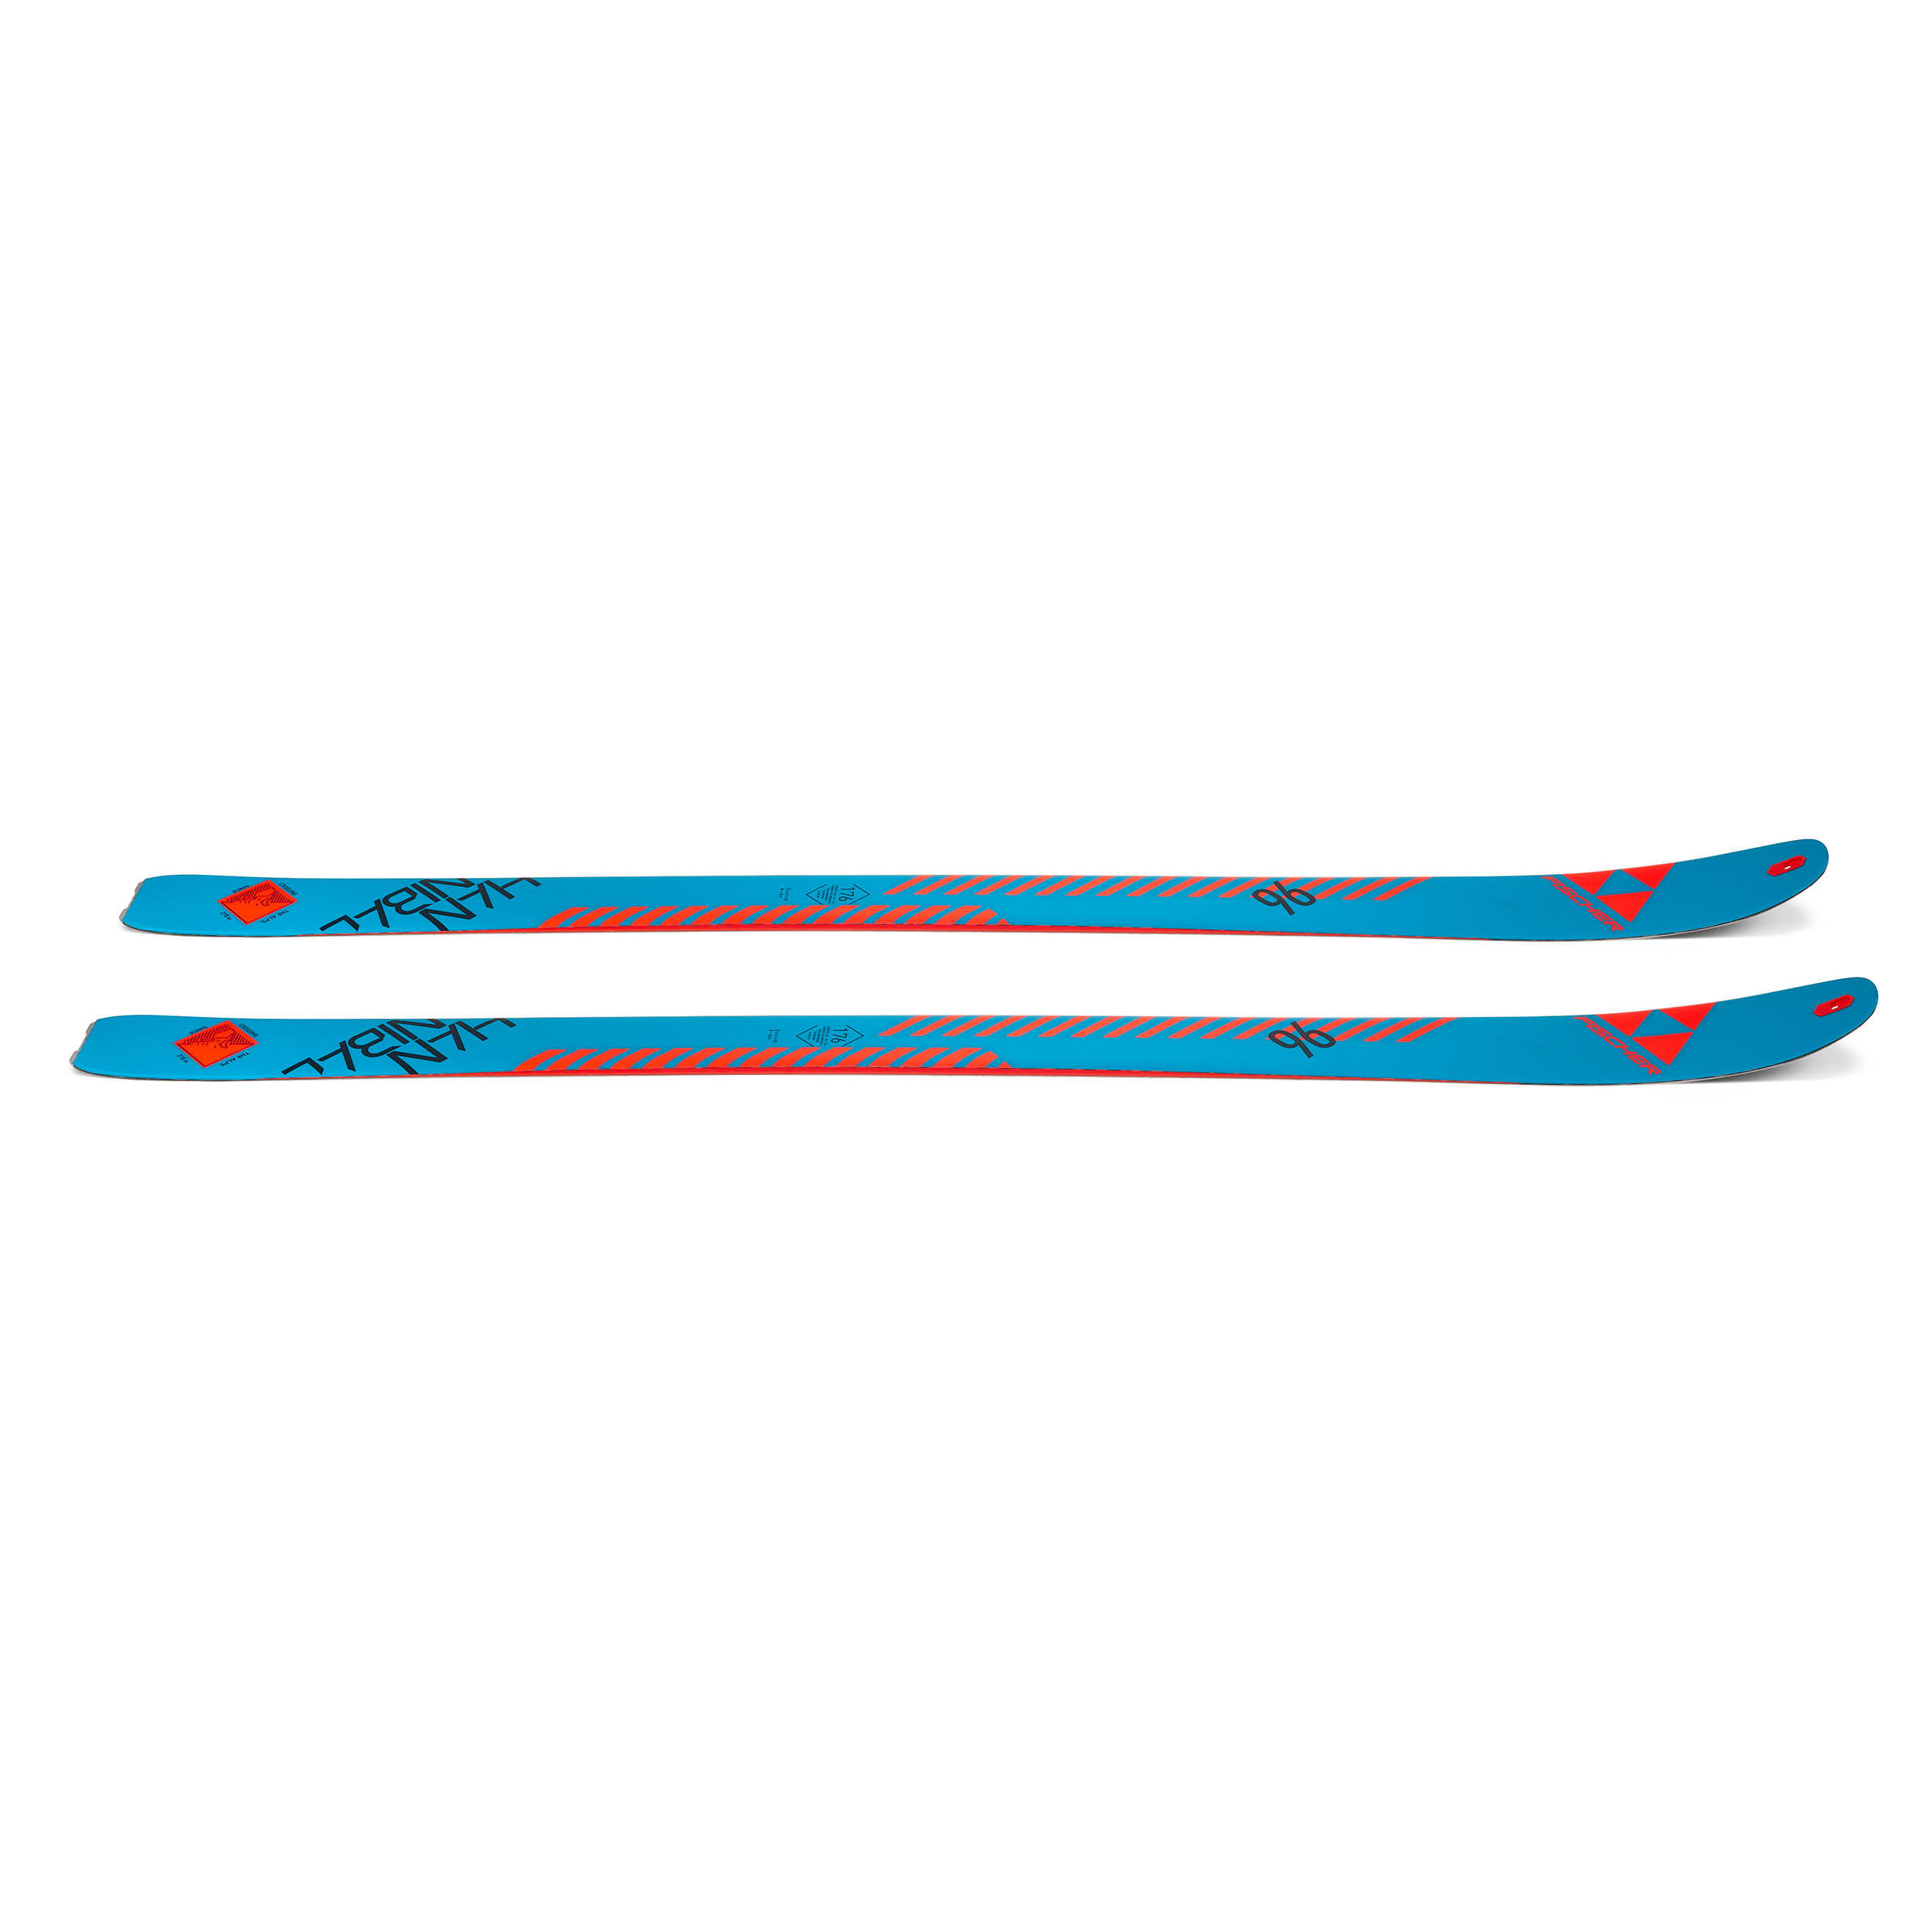 Touring Ski Fischer Hannibal 96 Carbon (without skins) 5/5